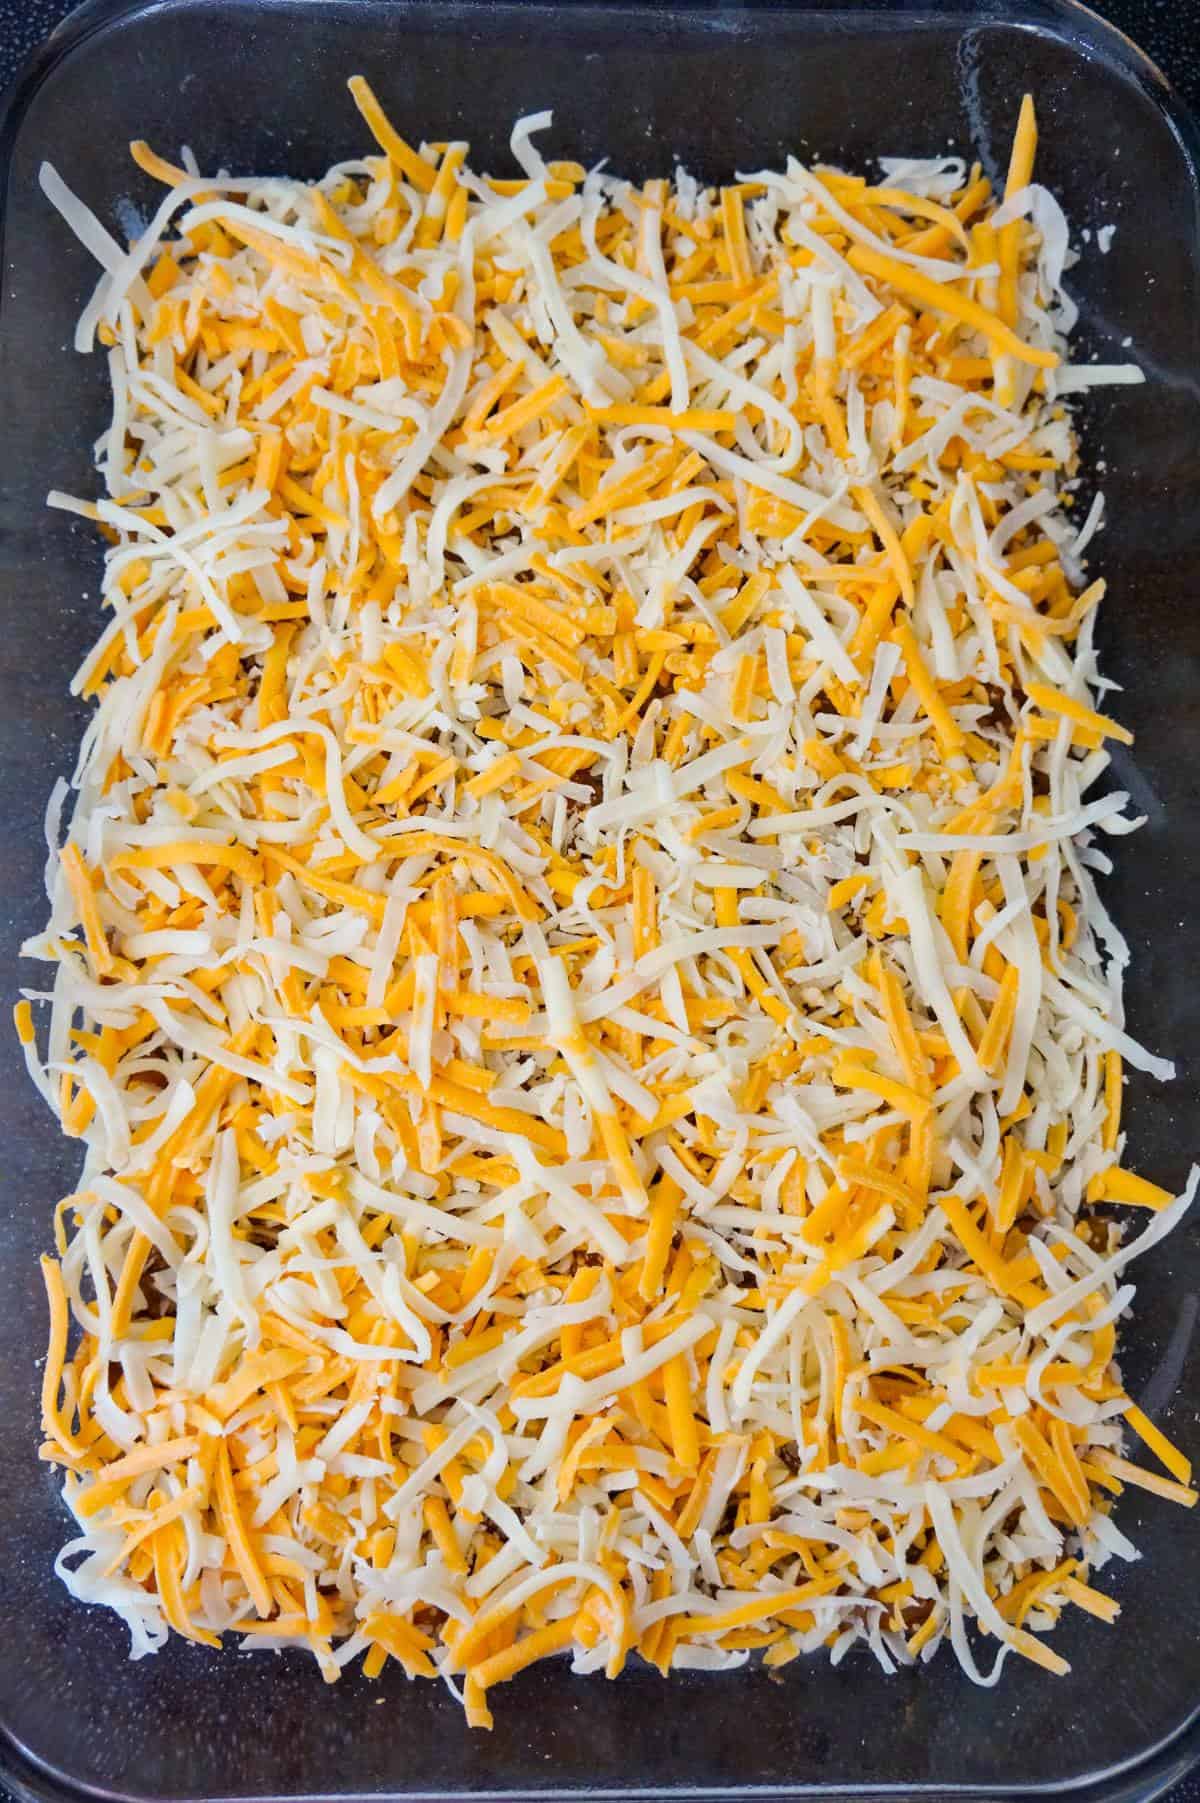 shredded cheese on top of sloppy joe mixture in a baking dish